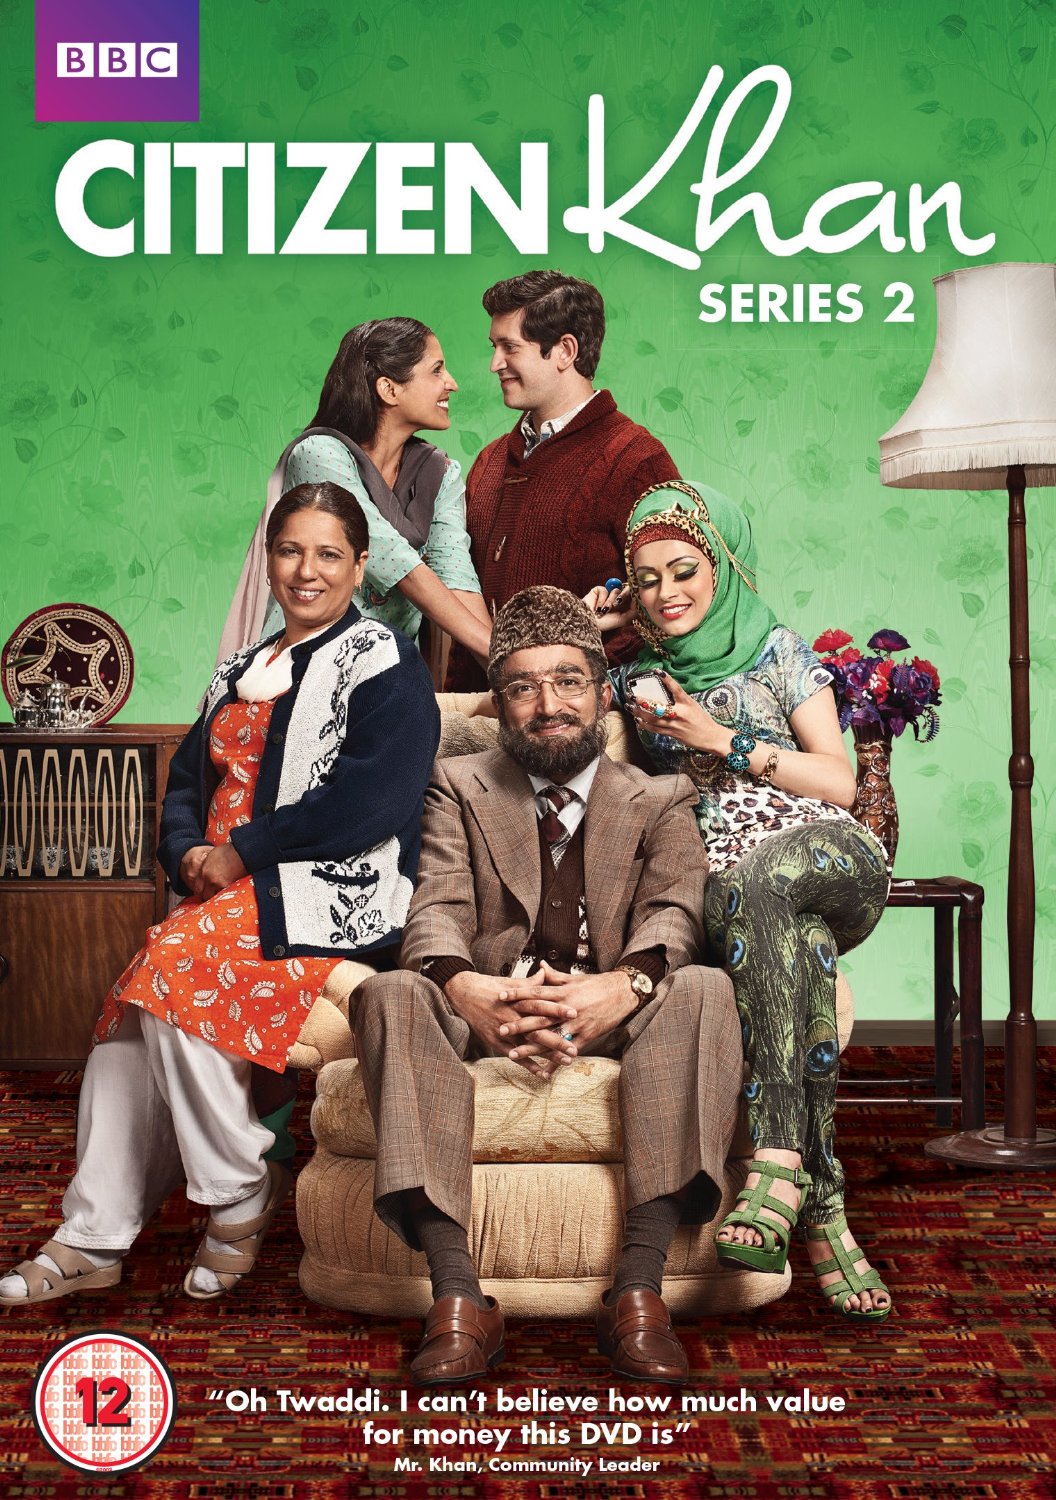 boom competitions - win a copy of Citizen Khan series on DVD